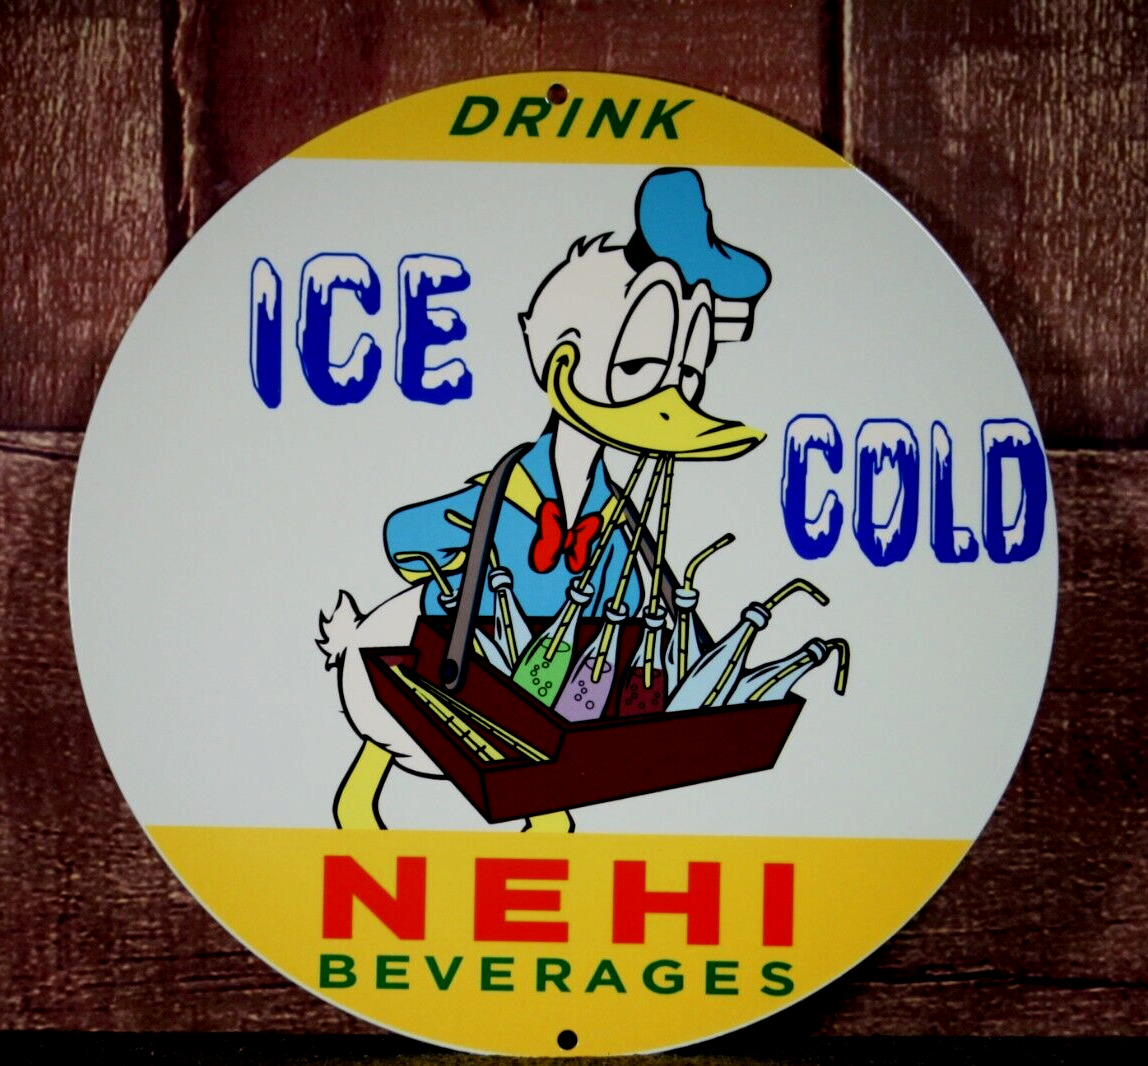 NEHI ICE COLD (DONALD DRINKS) PORCELAIN COLLECTIBLE, RUSTIC, ADVERTISING